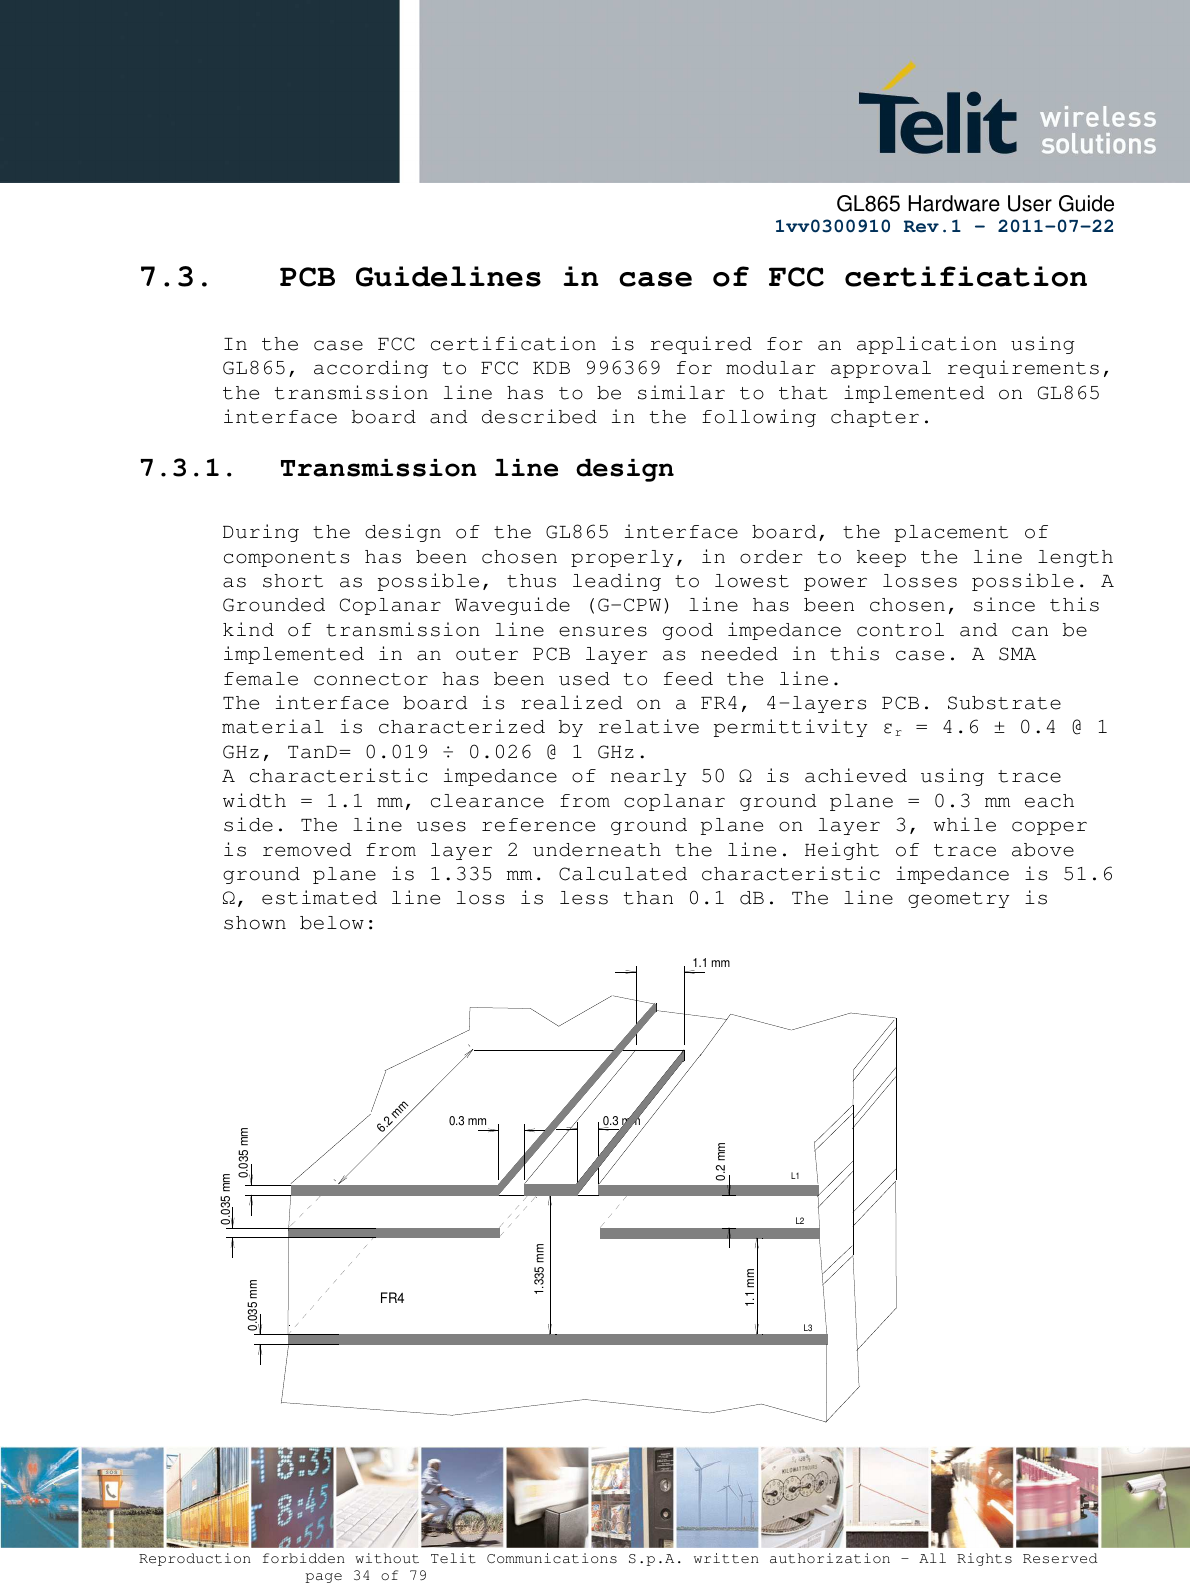      GL865 Hardware User Guide     1vv0300910 Rev.1 – 2011-07-22       Reproduction forbidden without Telit Communications S.p.A. written authorization - All Rights Reserved    page 34 of 79  7.3. PCB Guidelines in case of FCC certification  In the case FCC certification is required for an application using GL865, according to FCC KDB 996369 for modular approval requirements, the transmission line has to be similar to that implemented on GL865 interface board and described in the following chapter. 7.3.1. Transmission line design  During the design of the GL865 interface board, the placement of components has been chosen properly, in order to keep the line length as short as possible, thus leading to lowest power losses possible. A Grounded Coplanar Waveguide (G-CPW) line has been chosen, since this kind of transmission line ensures good impedance control and can be implemented in an outer PCB layer as needed in this case. A SMA female connector has been used to feed the line. The interface board is realized on a FR4, 4-layers PCB. Substrate material is characterized by relative permittivity εr = 4.6 ± 0.4 @ 1 GHz, TanD= 0.019 ÷ 0.026 @ 1 GHz. A characteristic impedance of nearly 50 Ω is achieved using trace width = 1.1 mm, clearance from coplanar ground plane = 0.3 mm each side. The line uses reference ground plane on layer 3, while copper is removed from layer 2 underneath the line. Height of trace above ground plane is 1.335 mm. Calculated characteristic impedance is 51.6 Ω, estimated line loss is less than 0.1 dB. The line geometry is shown below:                    0.3 mm0.035 mm0.3 mm6.2 mmFR40.035 mm0.035 mm1.335 mm0.2 mm1.1 mmL3L2L11.1 mm